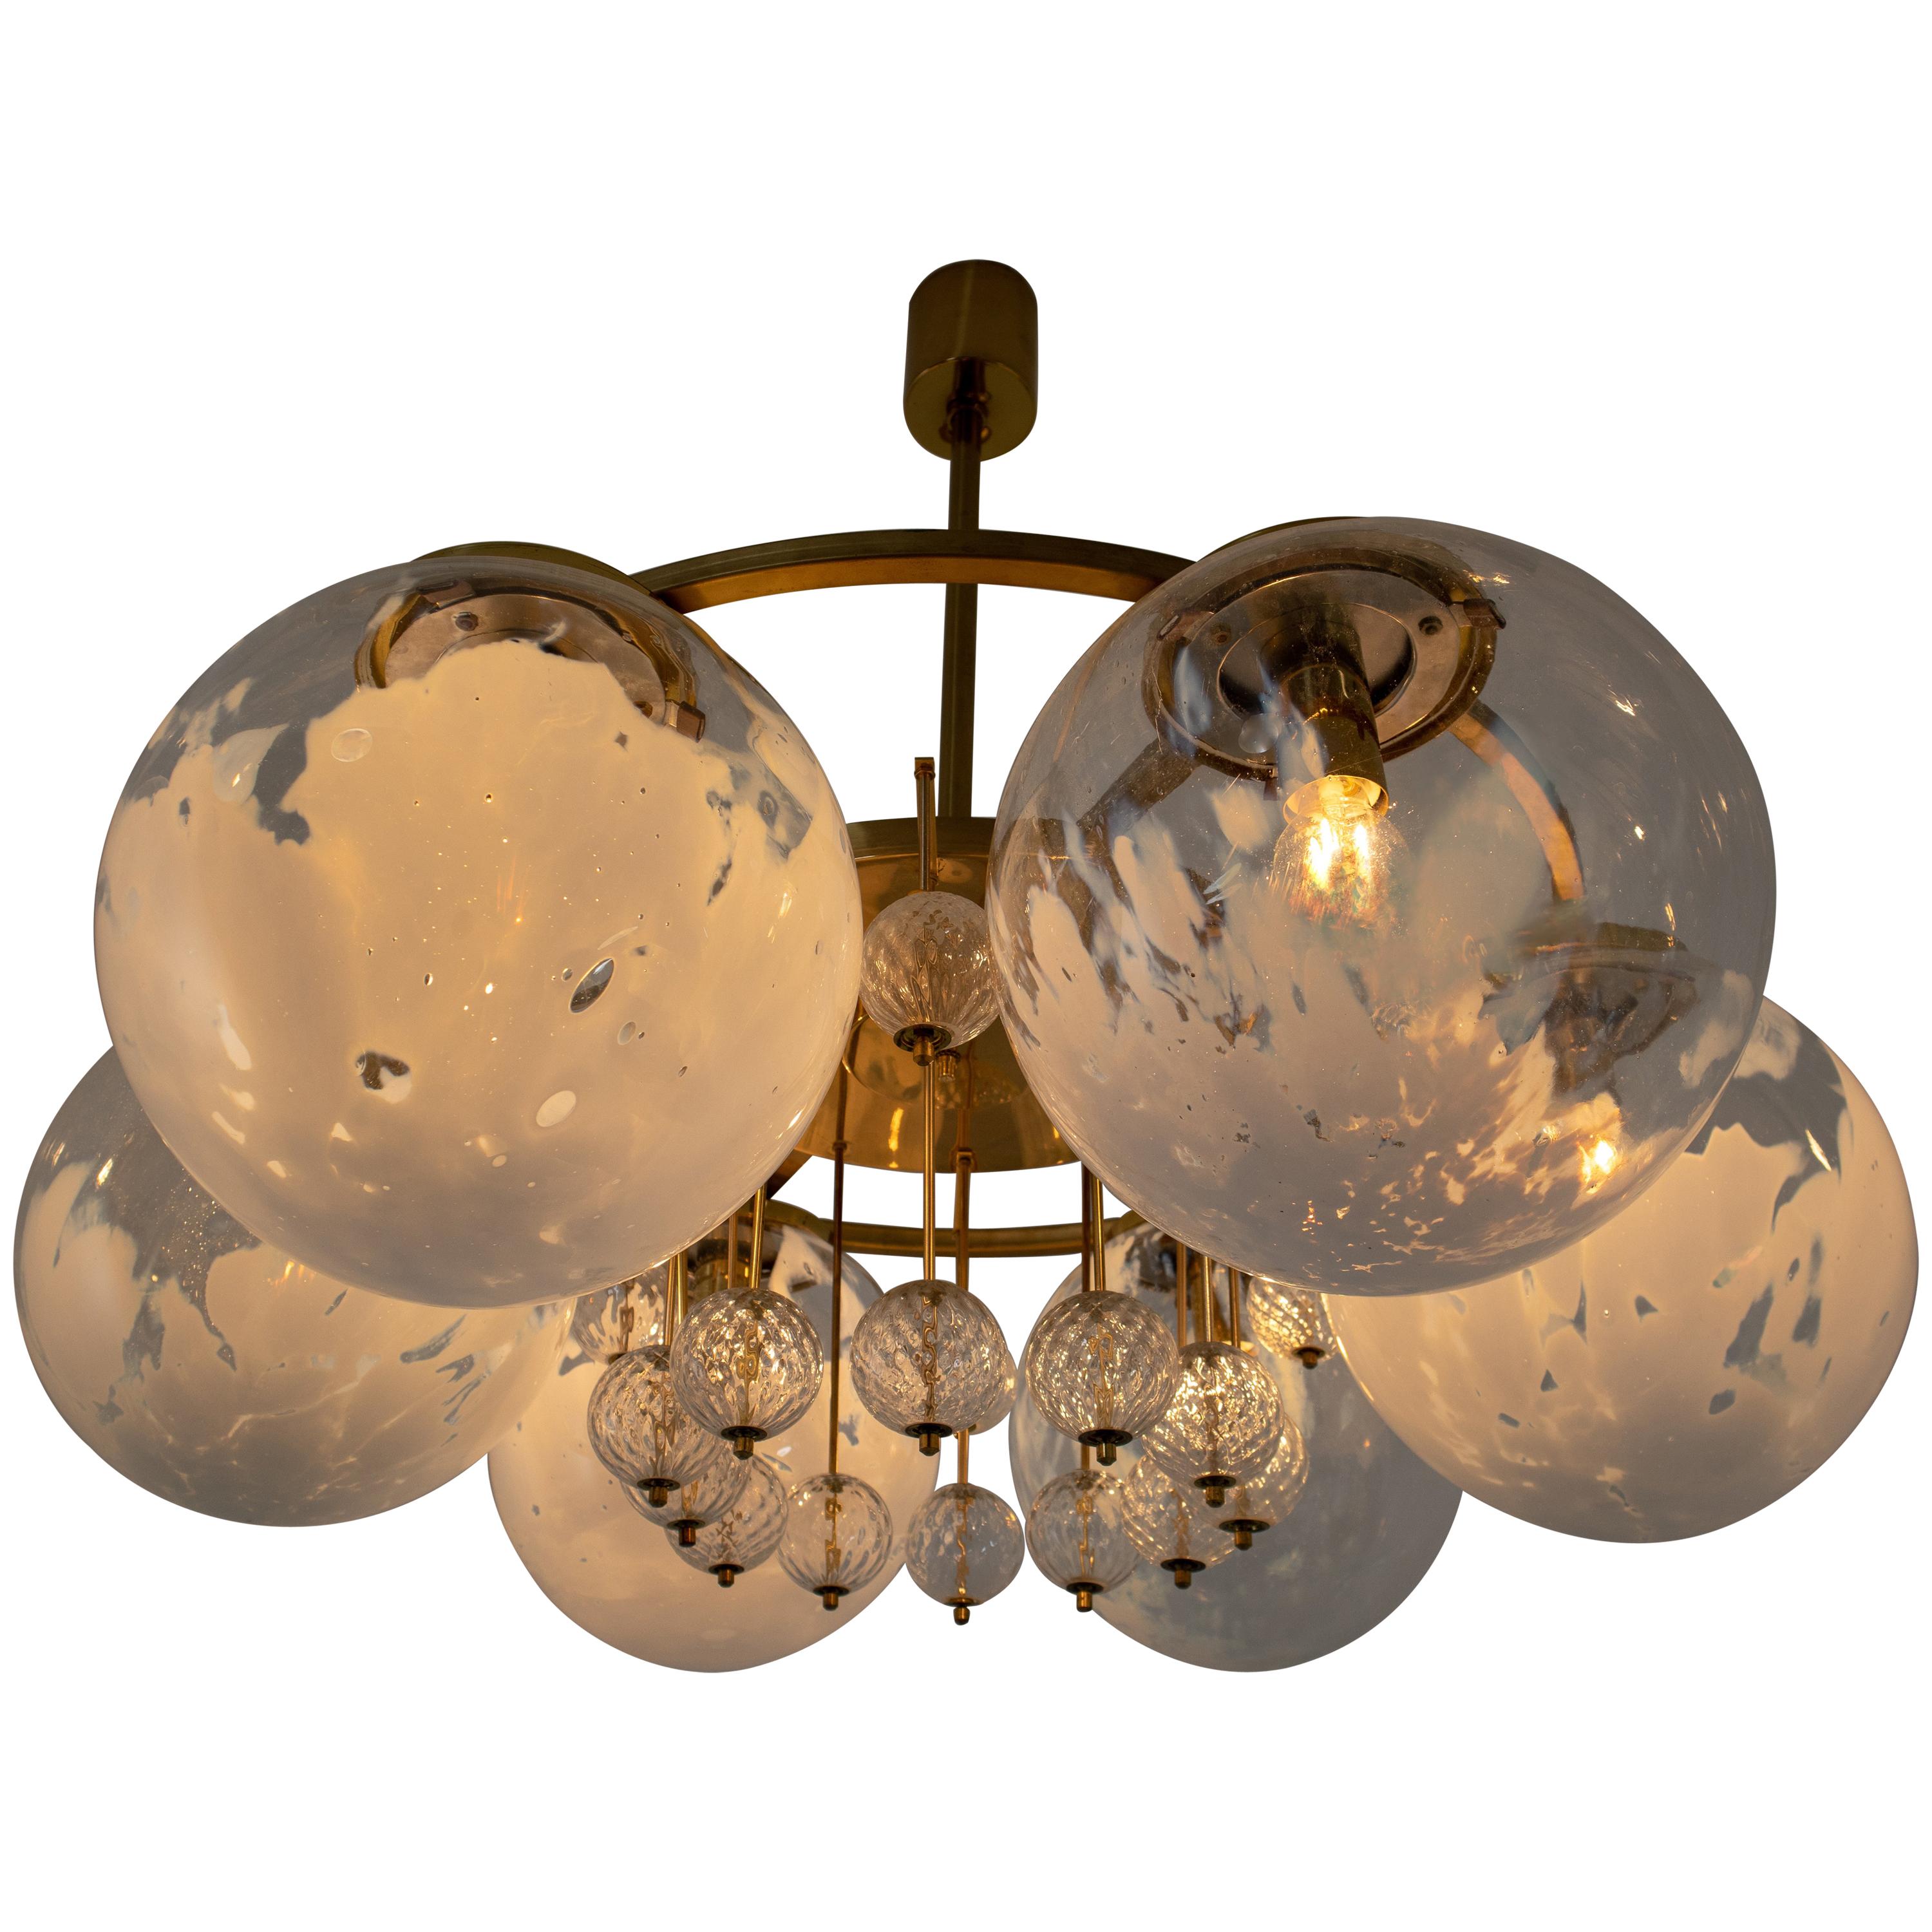 Large Midcentury Hotel Chandelier, in Brass and Decorated Art Glass